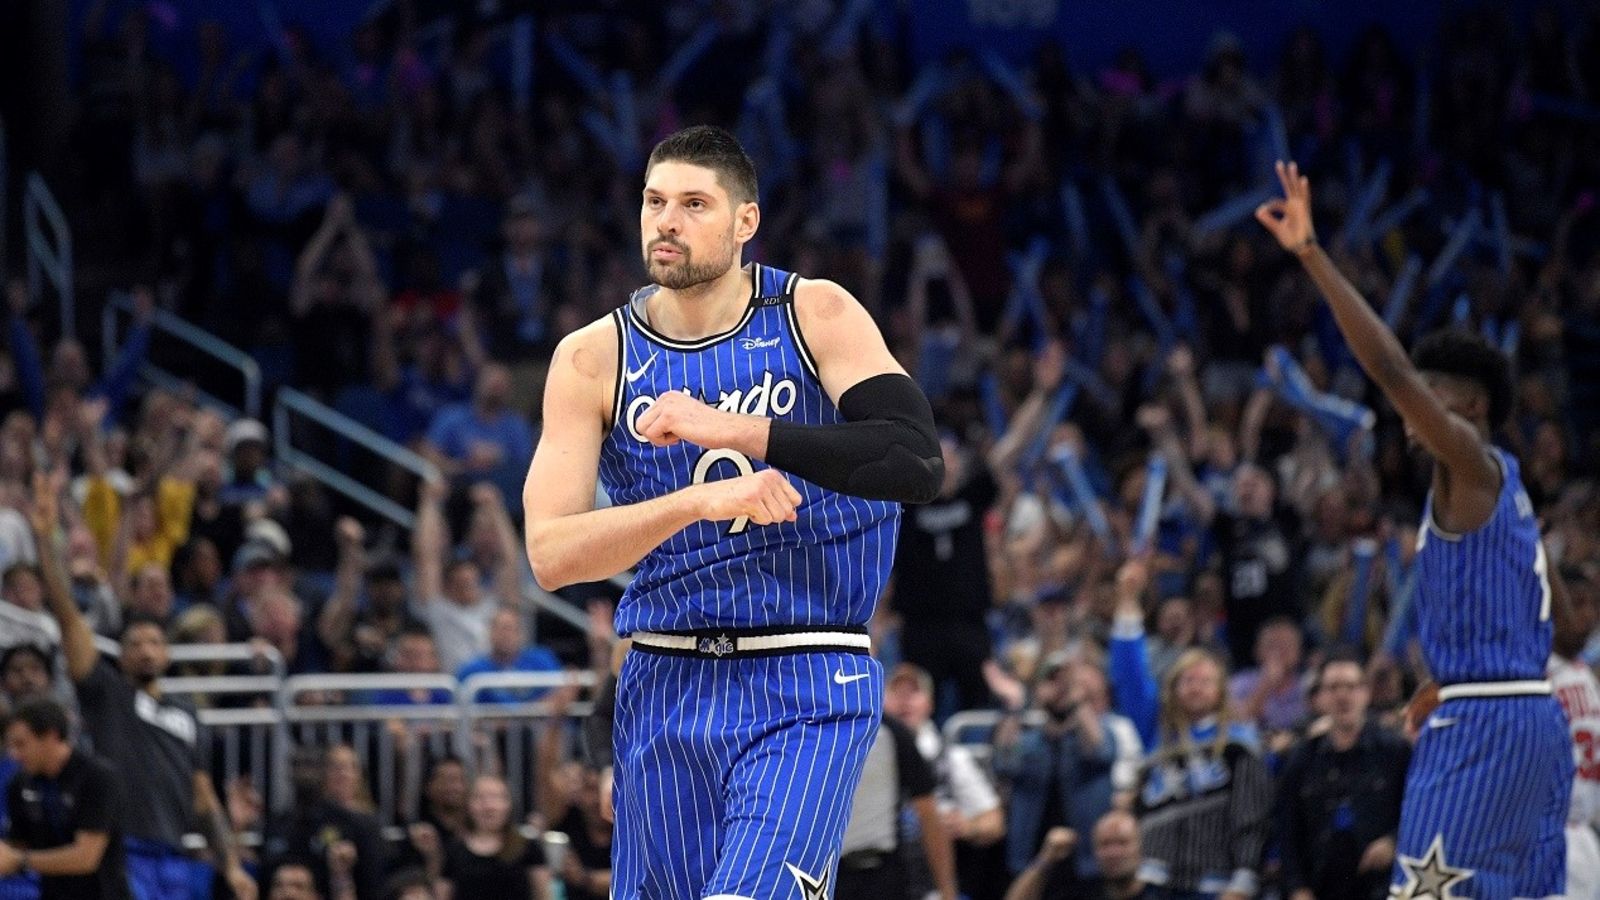 Chicago Bulls trade for Nikola Vucevic, Al Farouq Aminu of Orlando Magic in exchange for Wendell Carter, Otto Porter ahead of deadline, ESPN reports